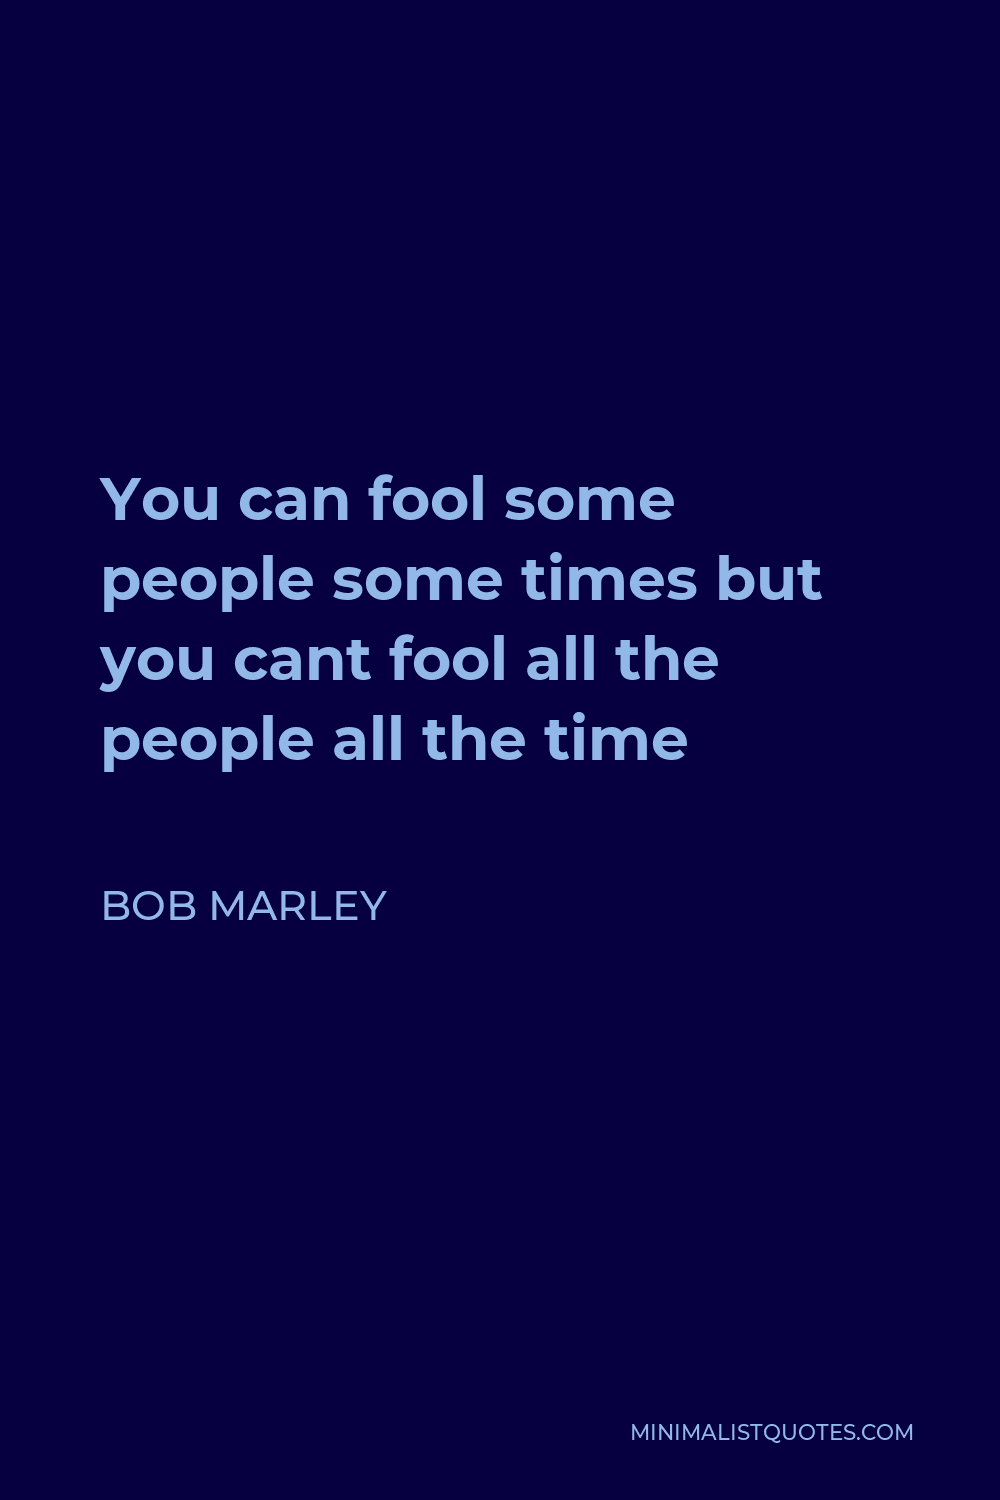 Bob Marley Quote - You can fool some people some times but you cant fool all the people all the time